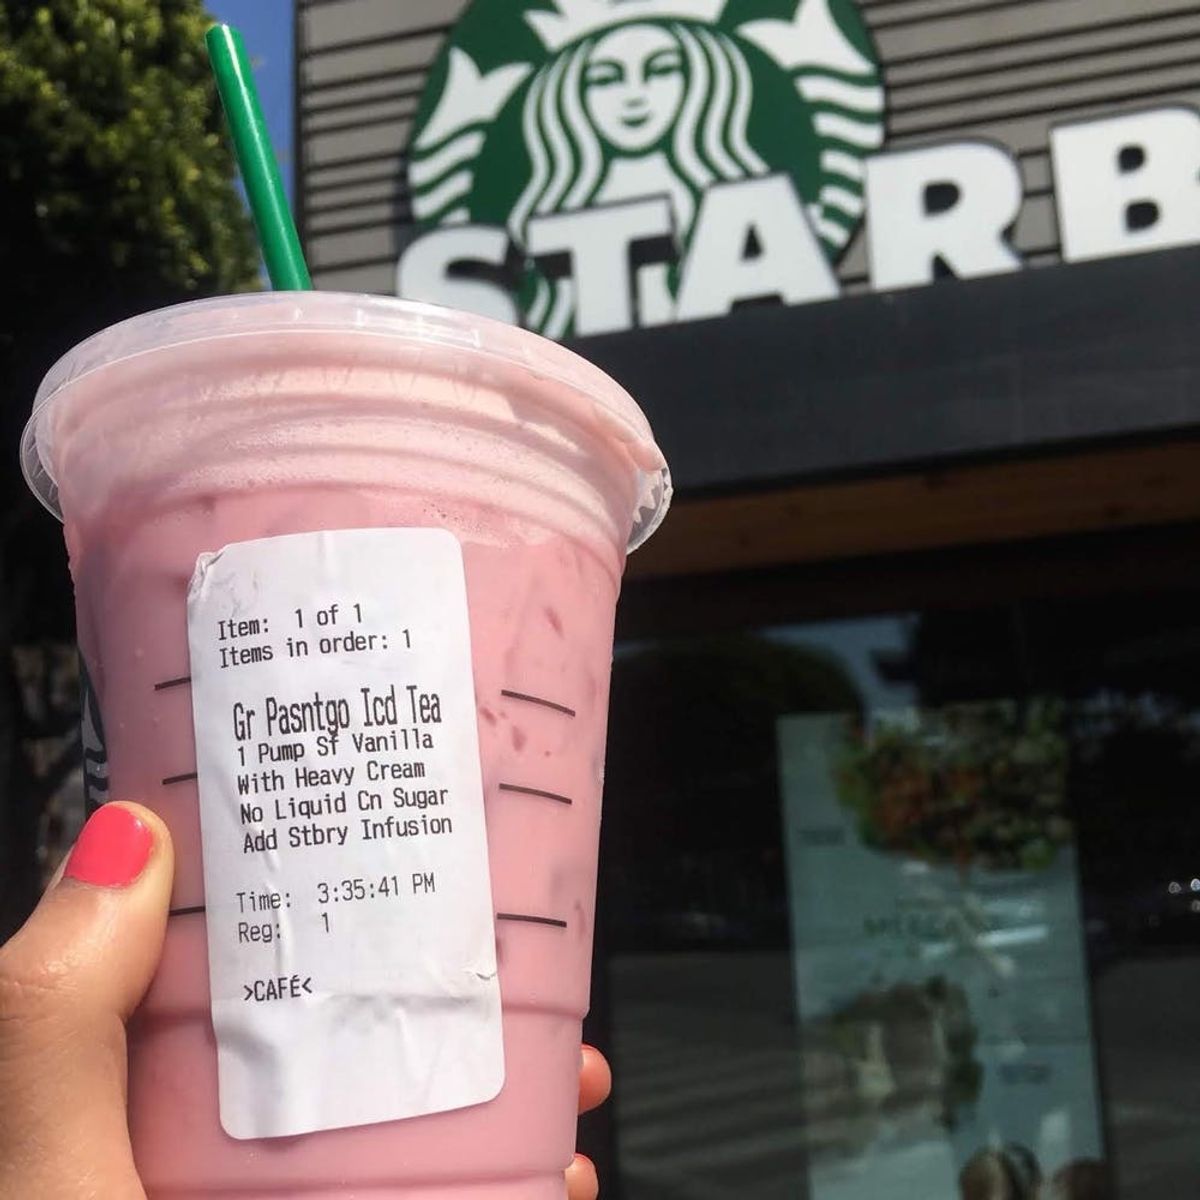 We Tried Starbucks’ Keto Pink Drink… and the Internet Cannot Be Trusted